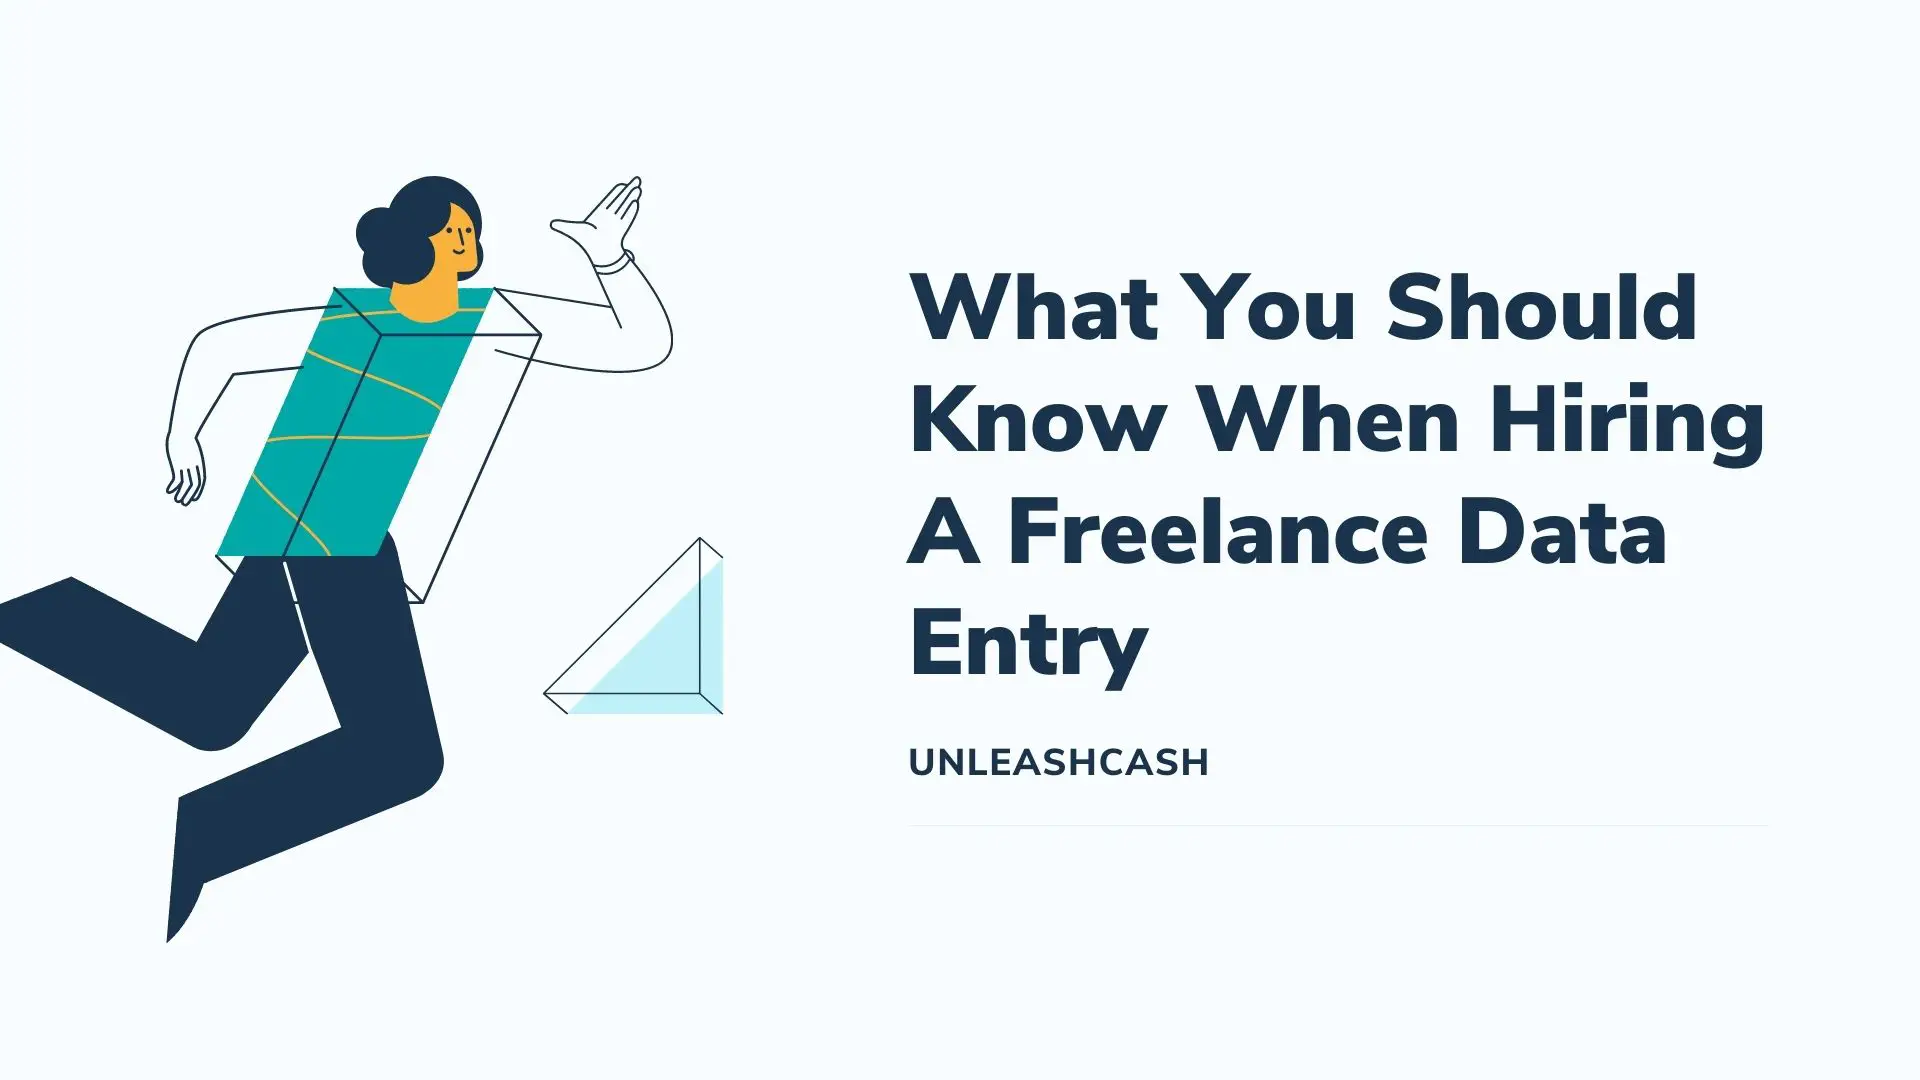 What You Should Know When Hiring A Freelance Data Entry